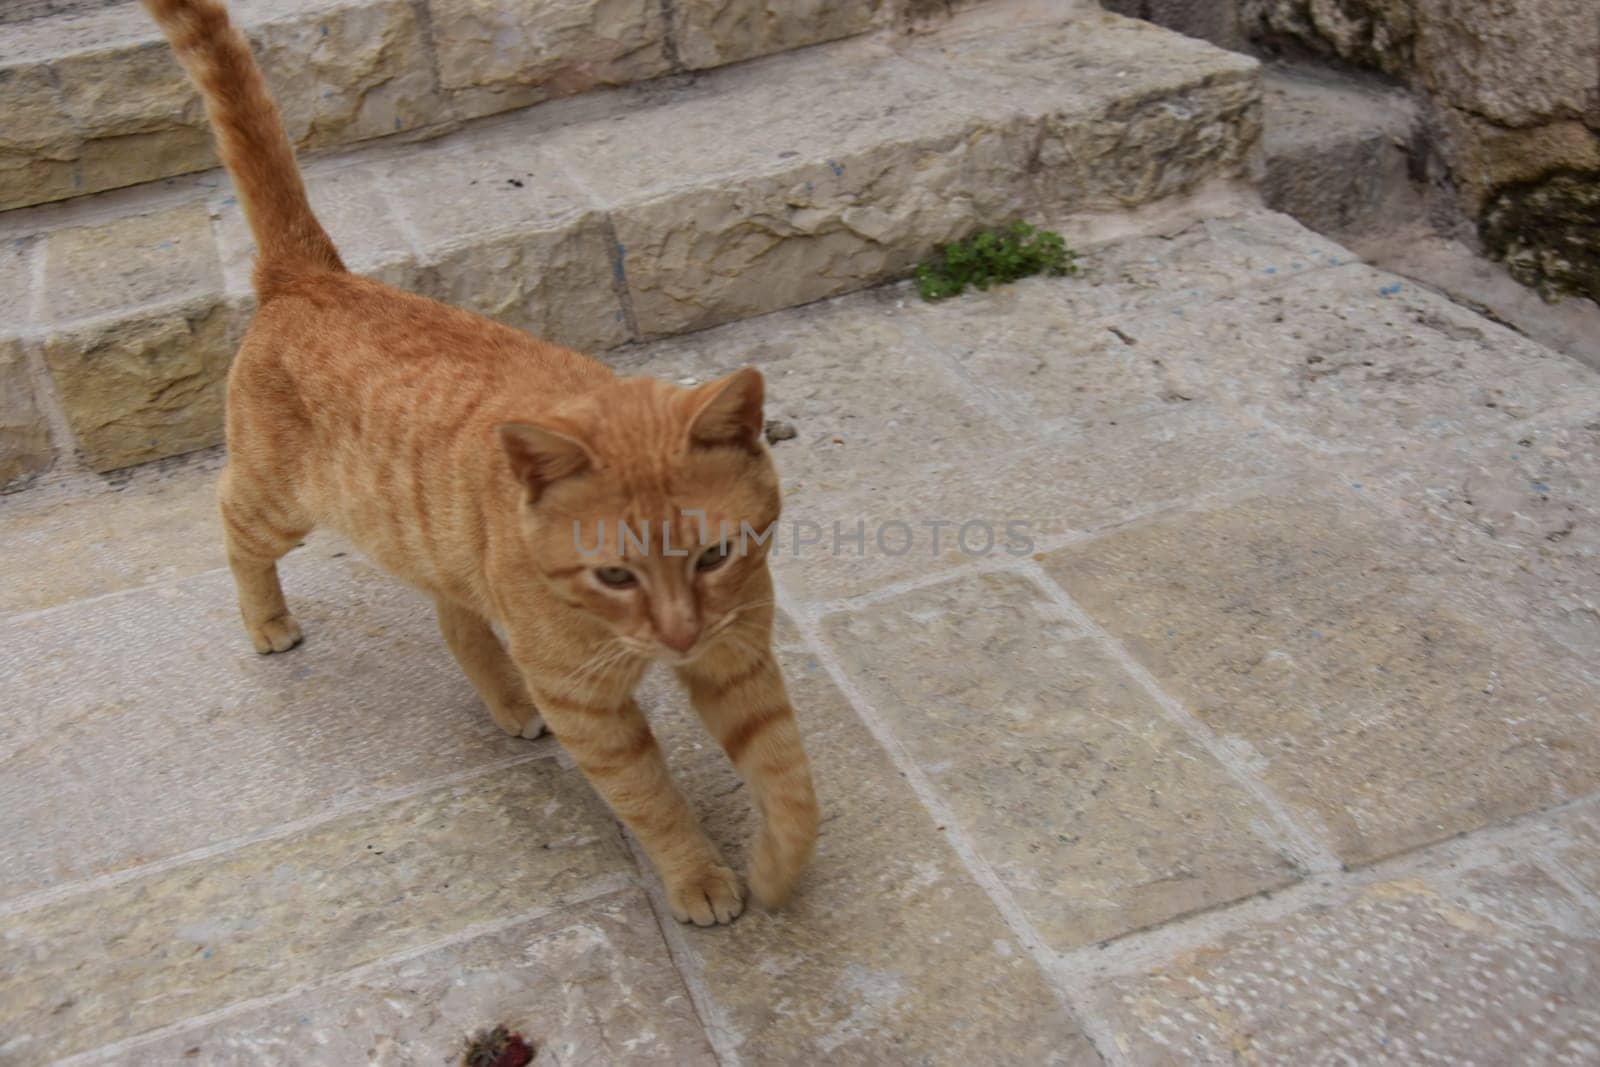 A ginger cat walks along the old white stone steps. Jerusalem, Israel 27 March 2021 by Ply